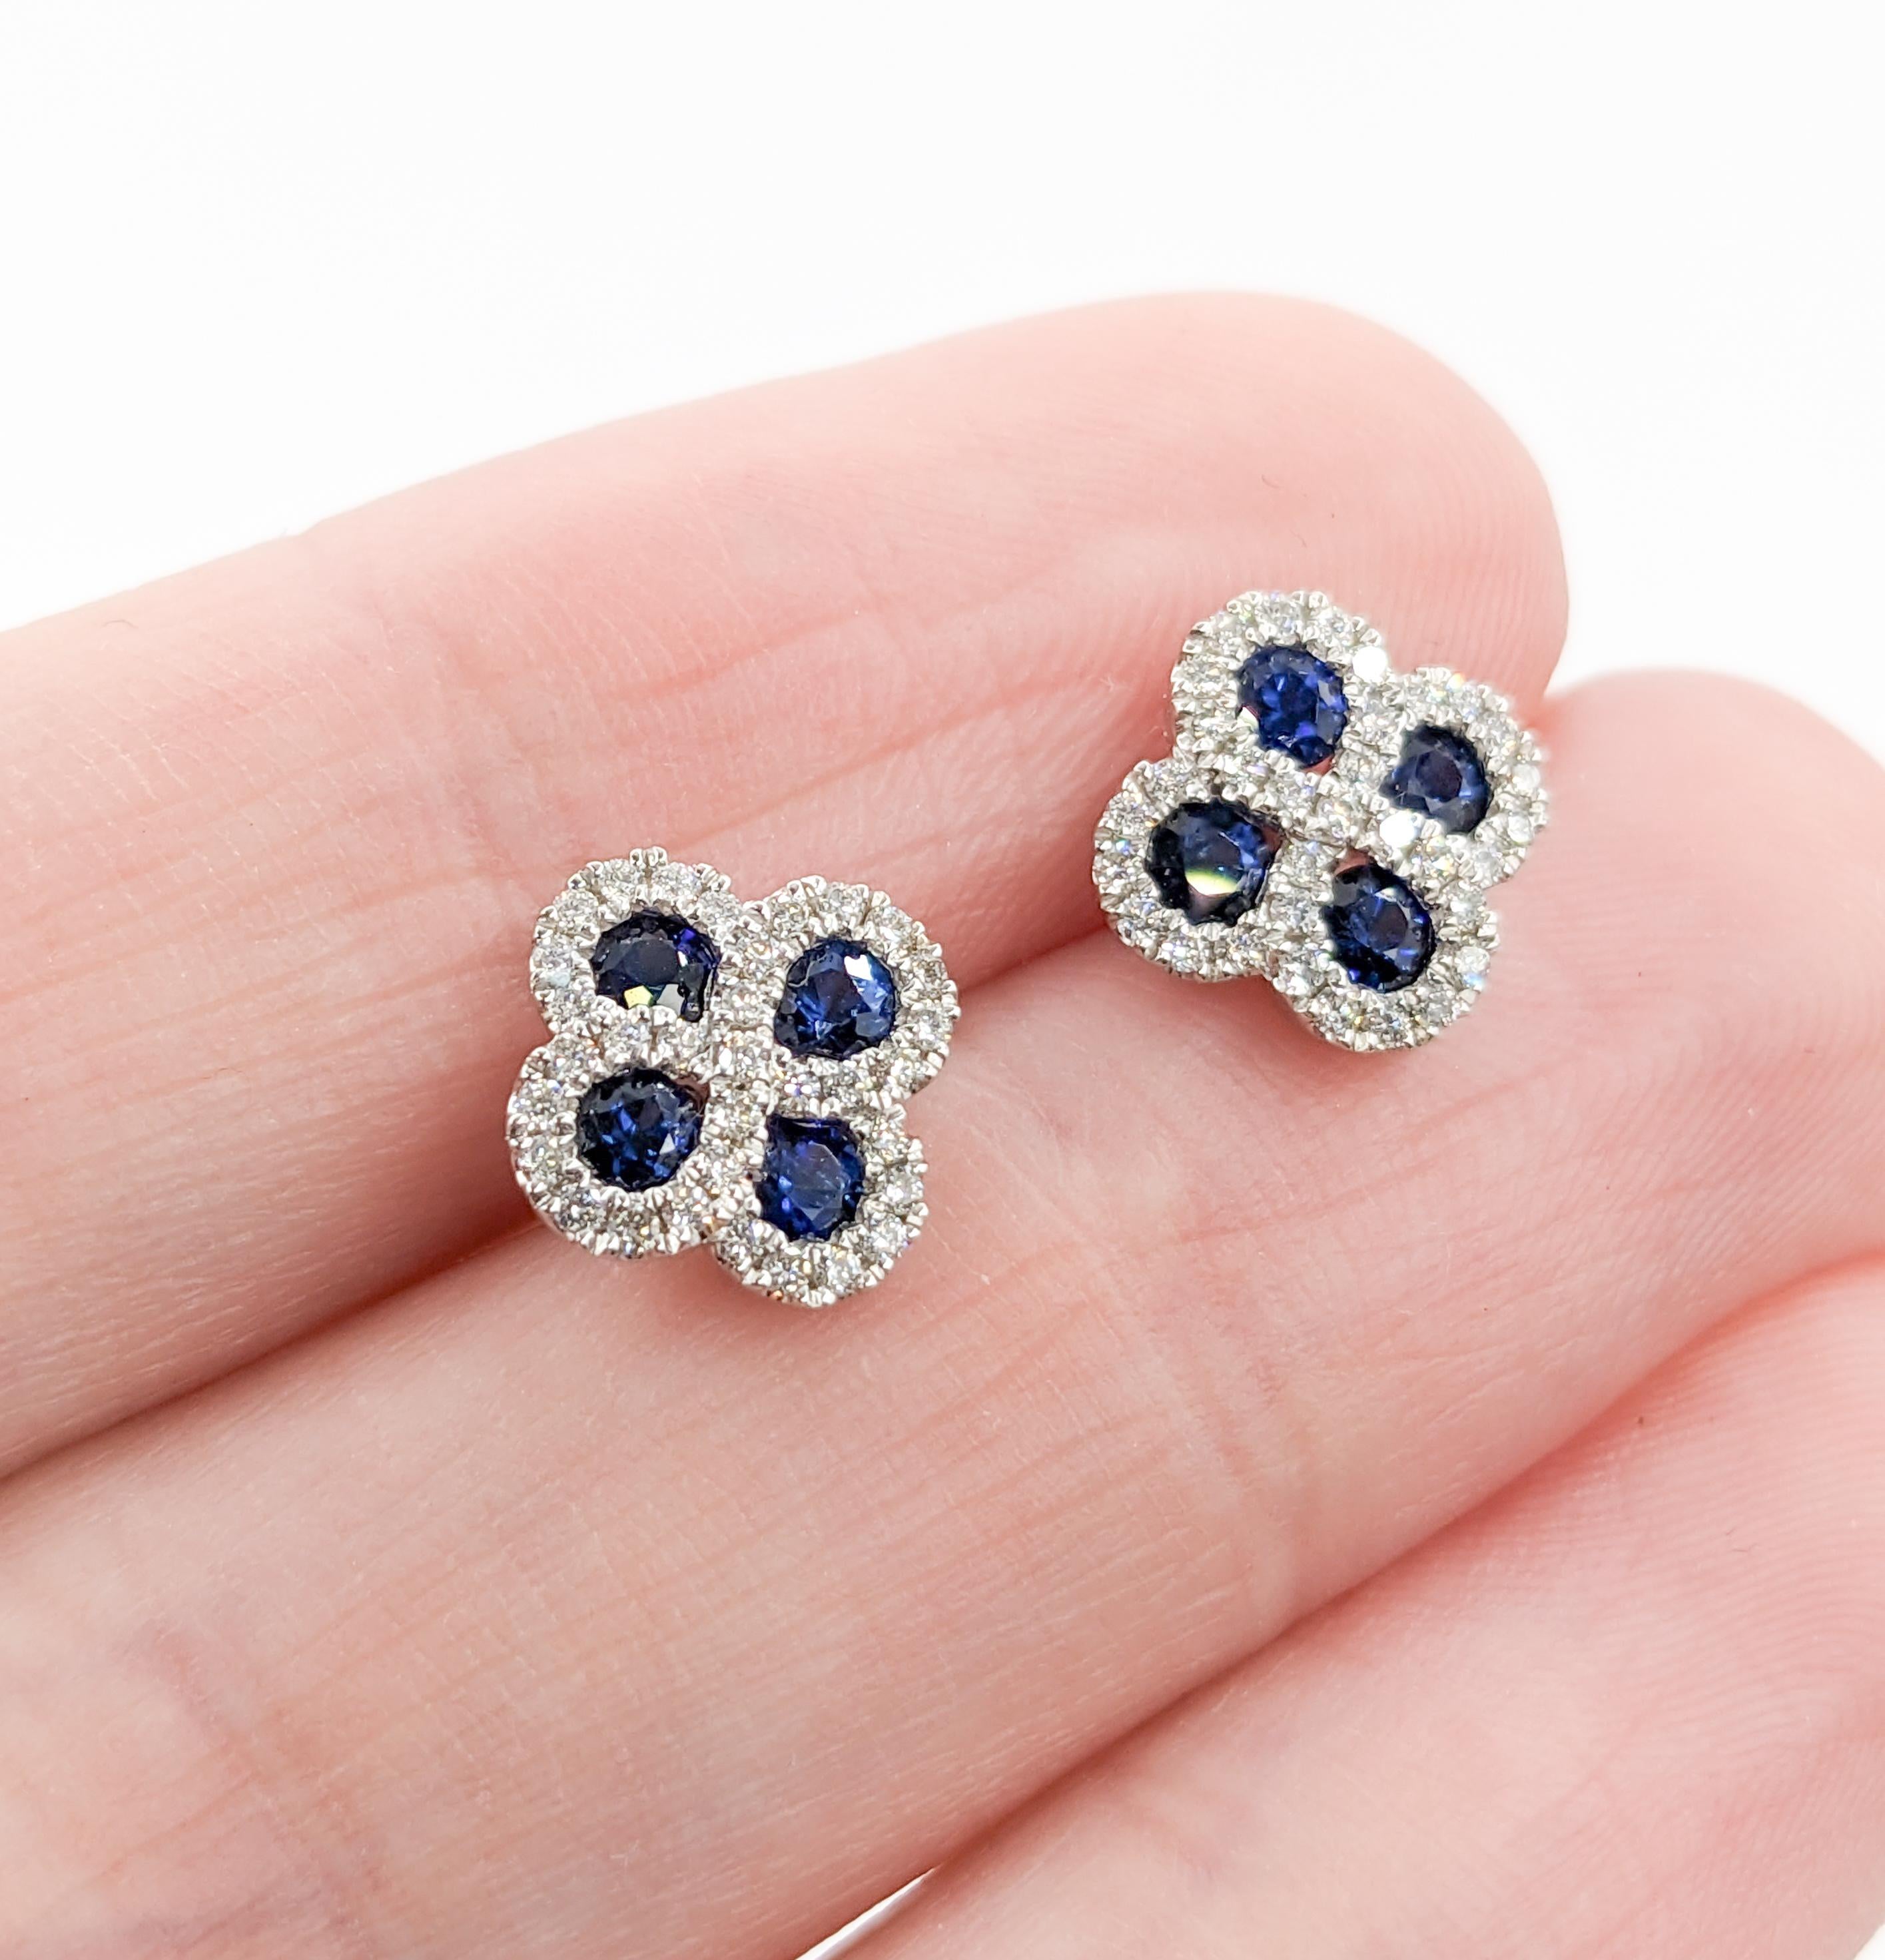 Sapphire & Diamond Clover Shaped Stud Earrings in White Gold

These exquisite quatrefoil shaped sapphire earrings are meticulously crafted in 14k white gold with 0.40 carats of deep blue sapphires.
In addition to the sapphires, these earrings are